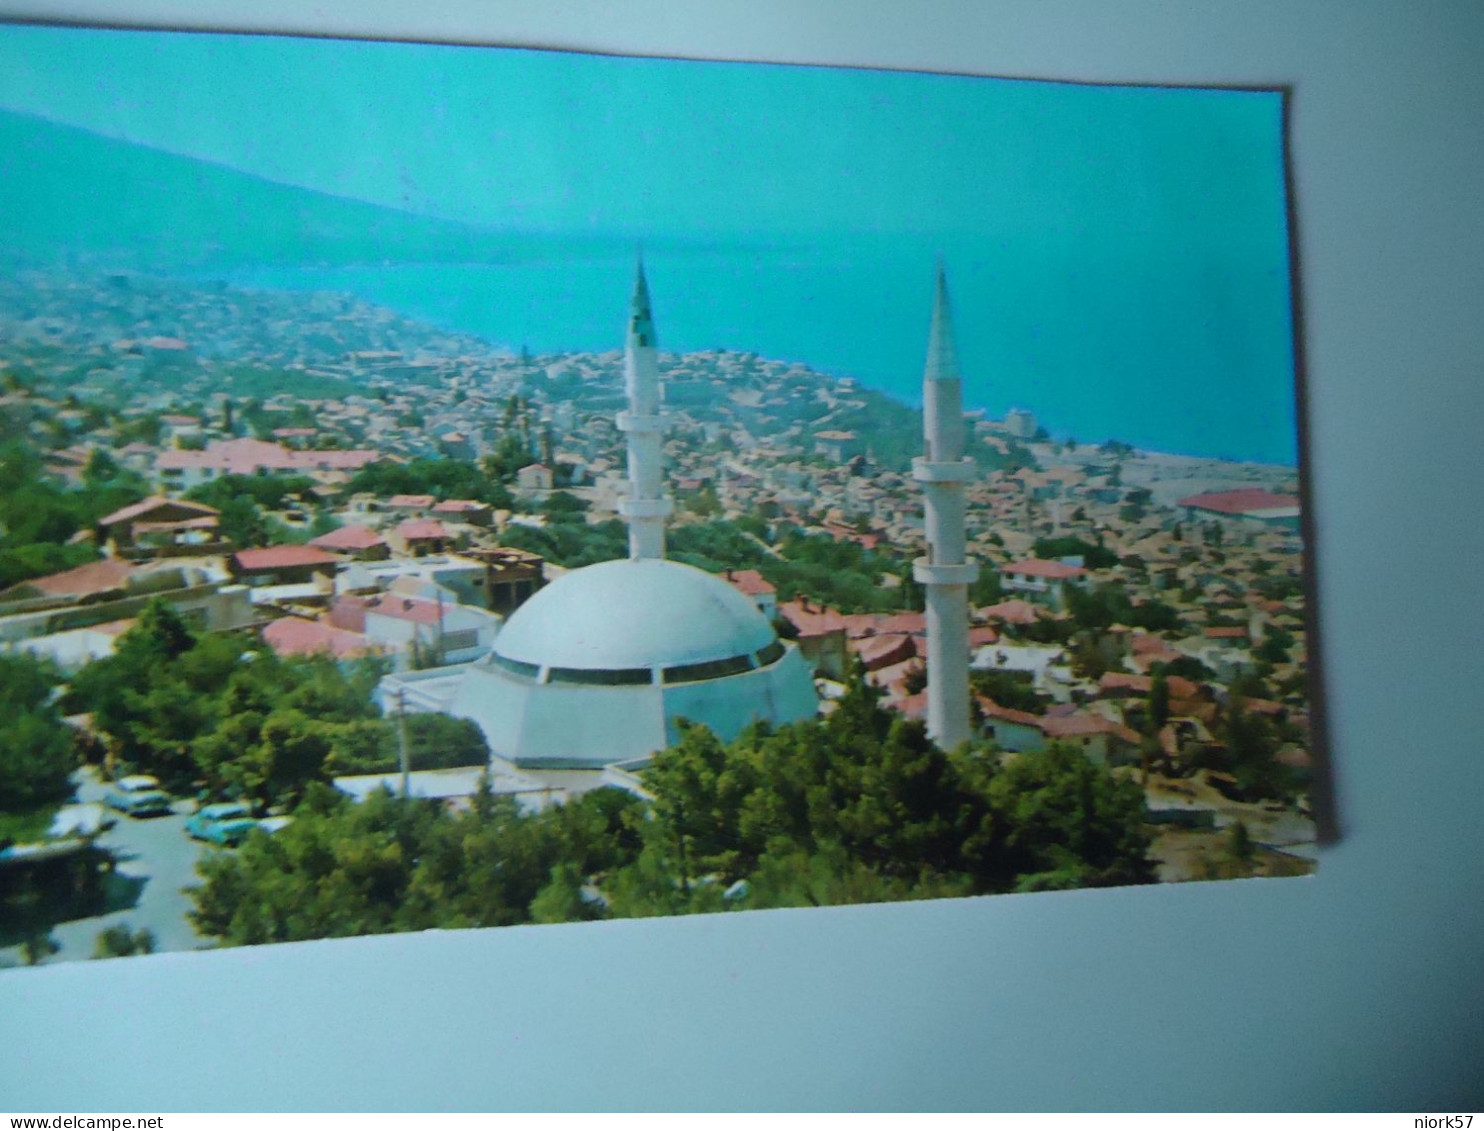 TURKEY    POSTCARDS MONUMENTS    MORE  PURHASES 10% DISCOUNT - Turkey